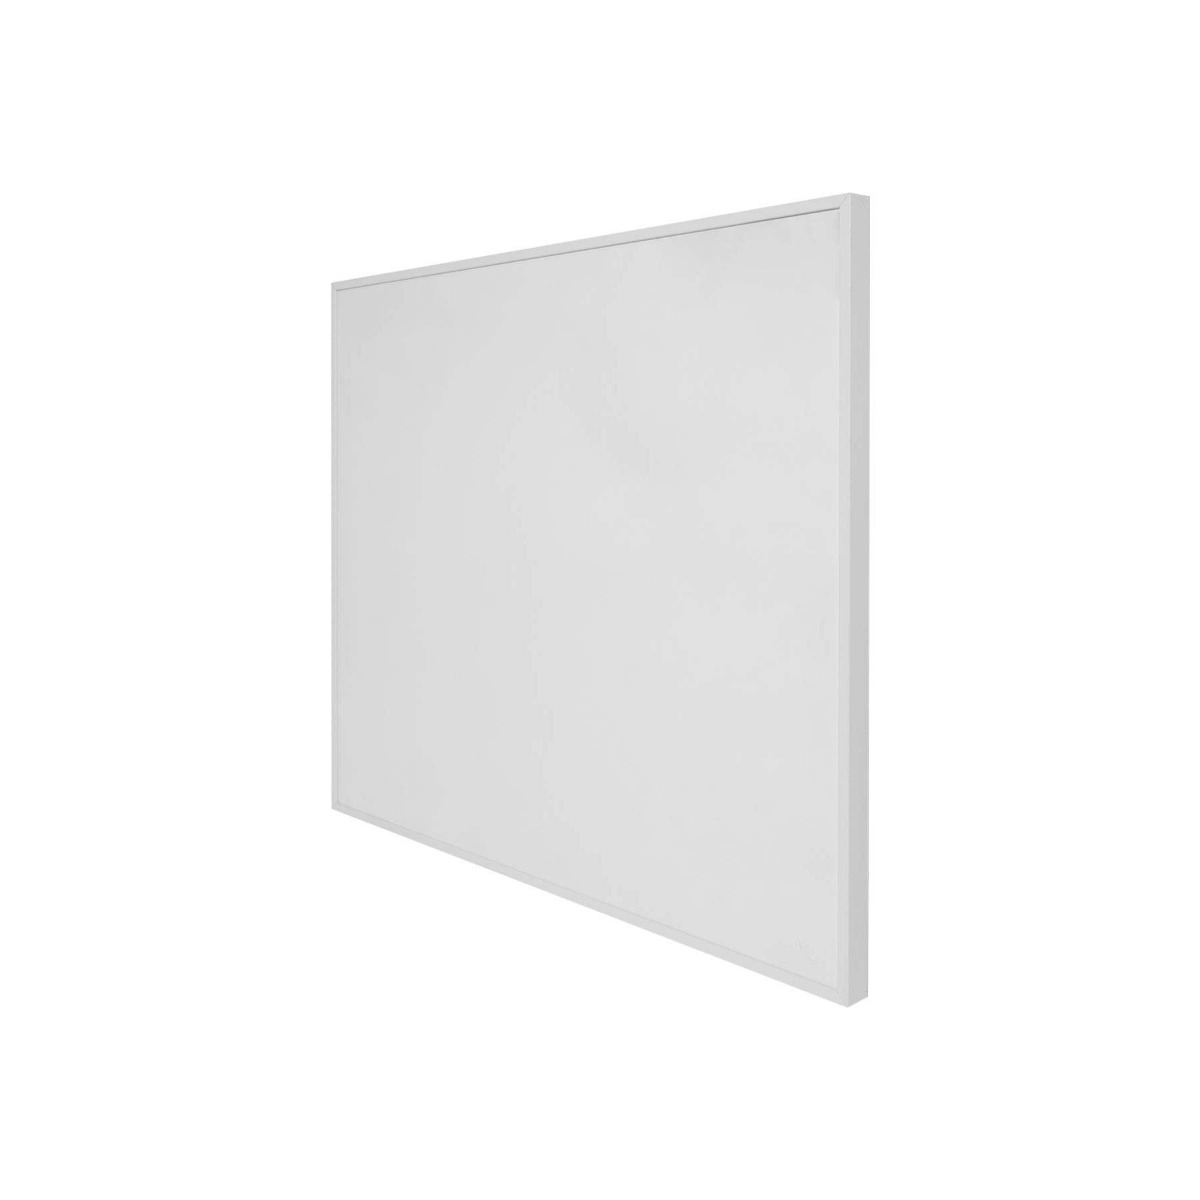 Ecostrad Accent IR Infrared Ceiling Panel with Remote - 270w (595 x 595mm)